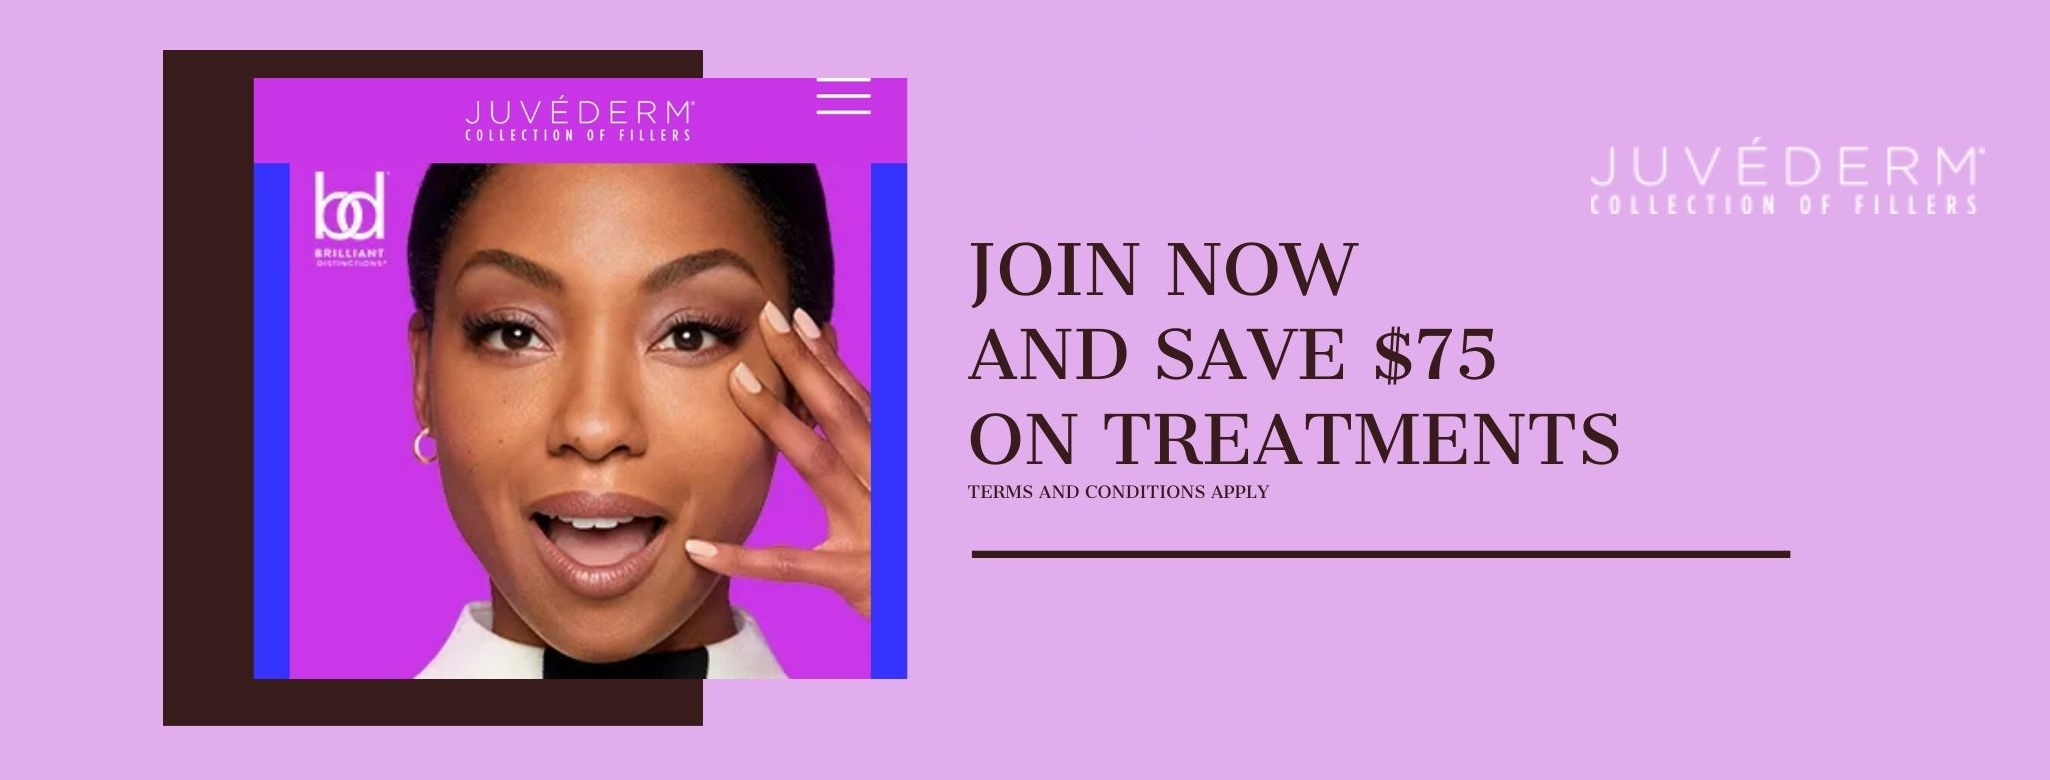 JOIN NOW AND SAVE $75 ON Ads  JUVÉDERM TREATMENTS